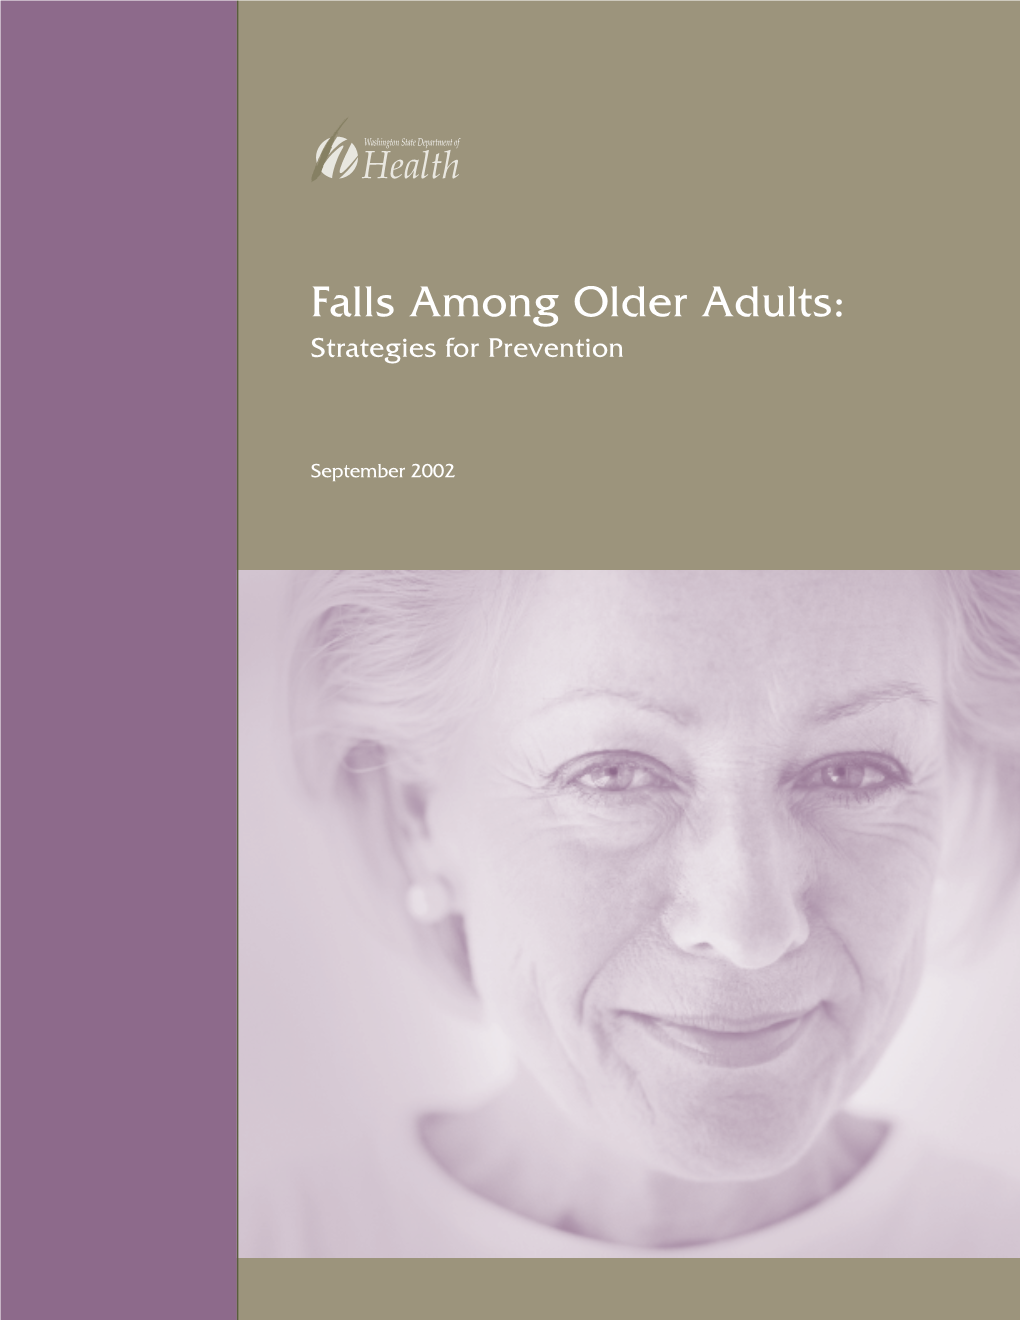 Falls Among Older Adults: Strategies for Prevention